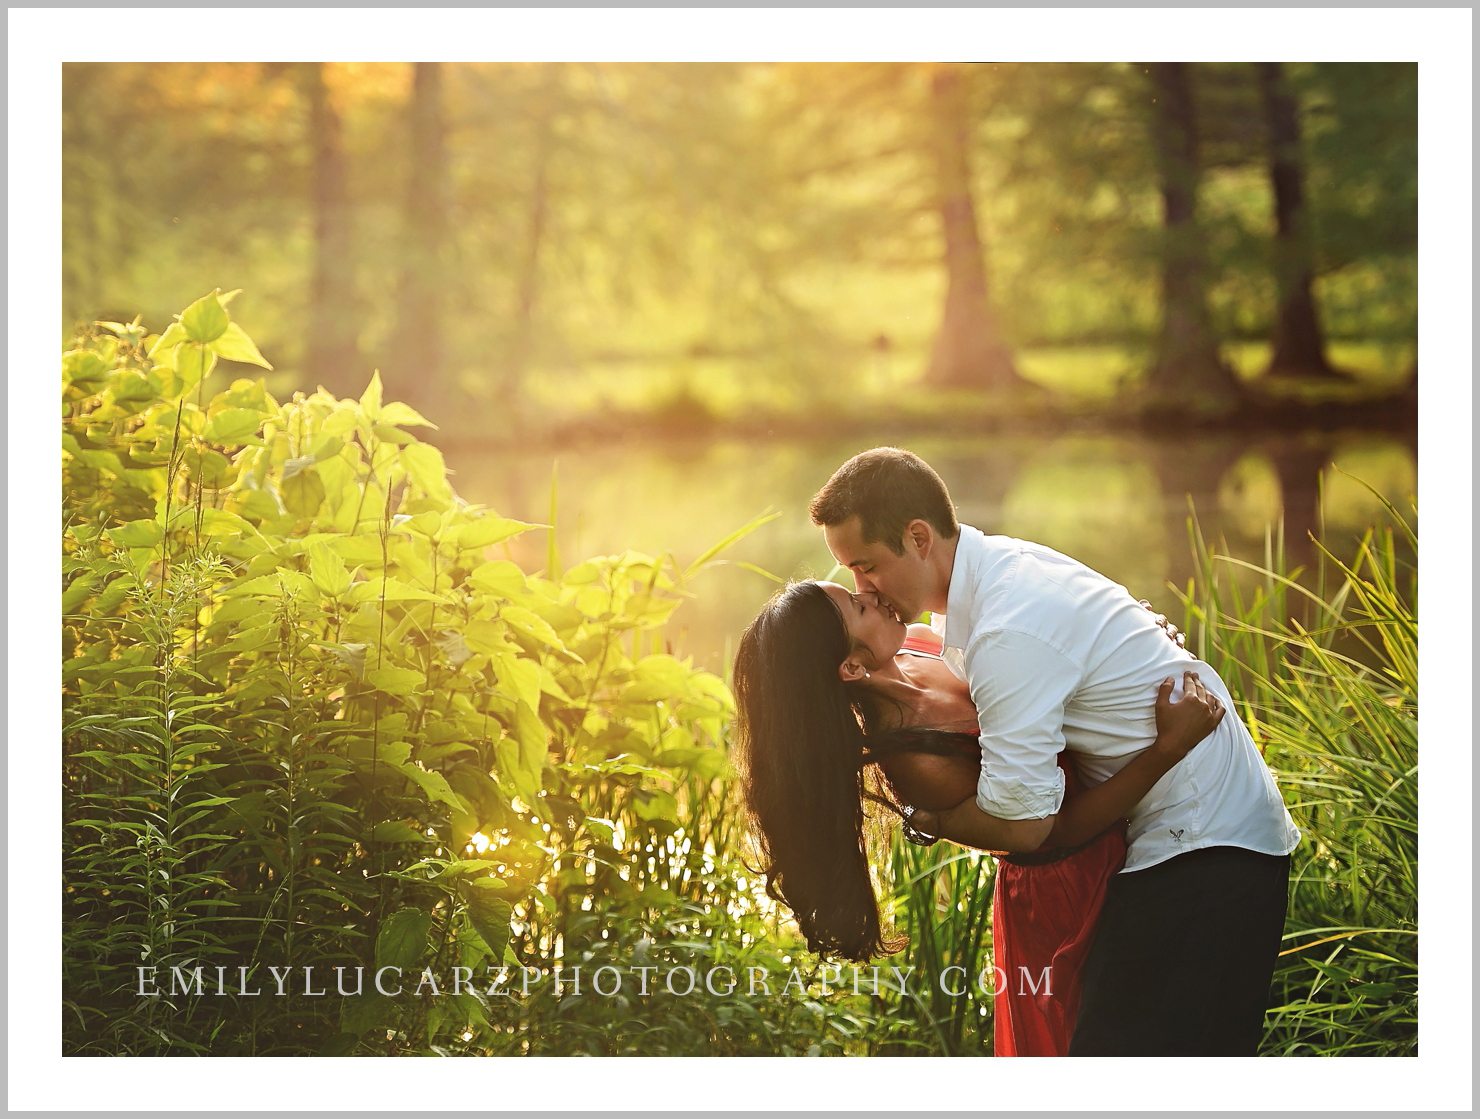 St. Louis child and family photographer